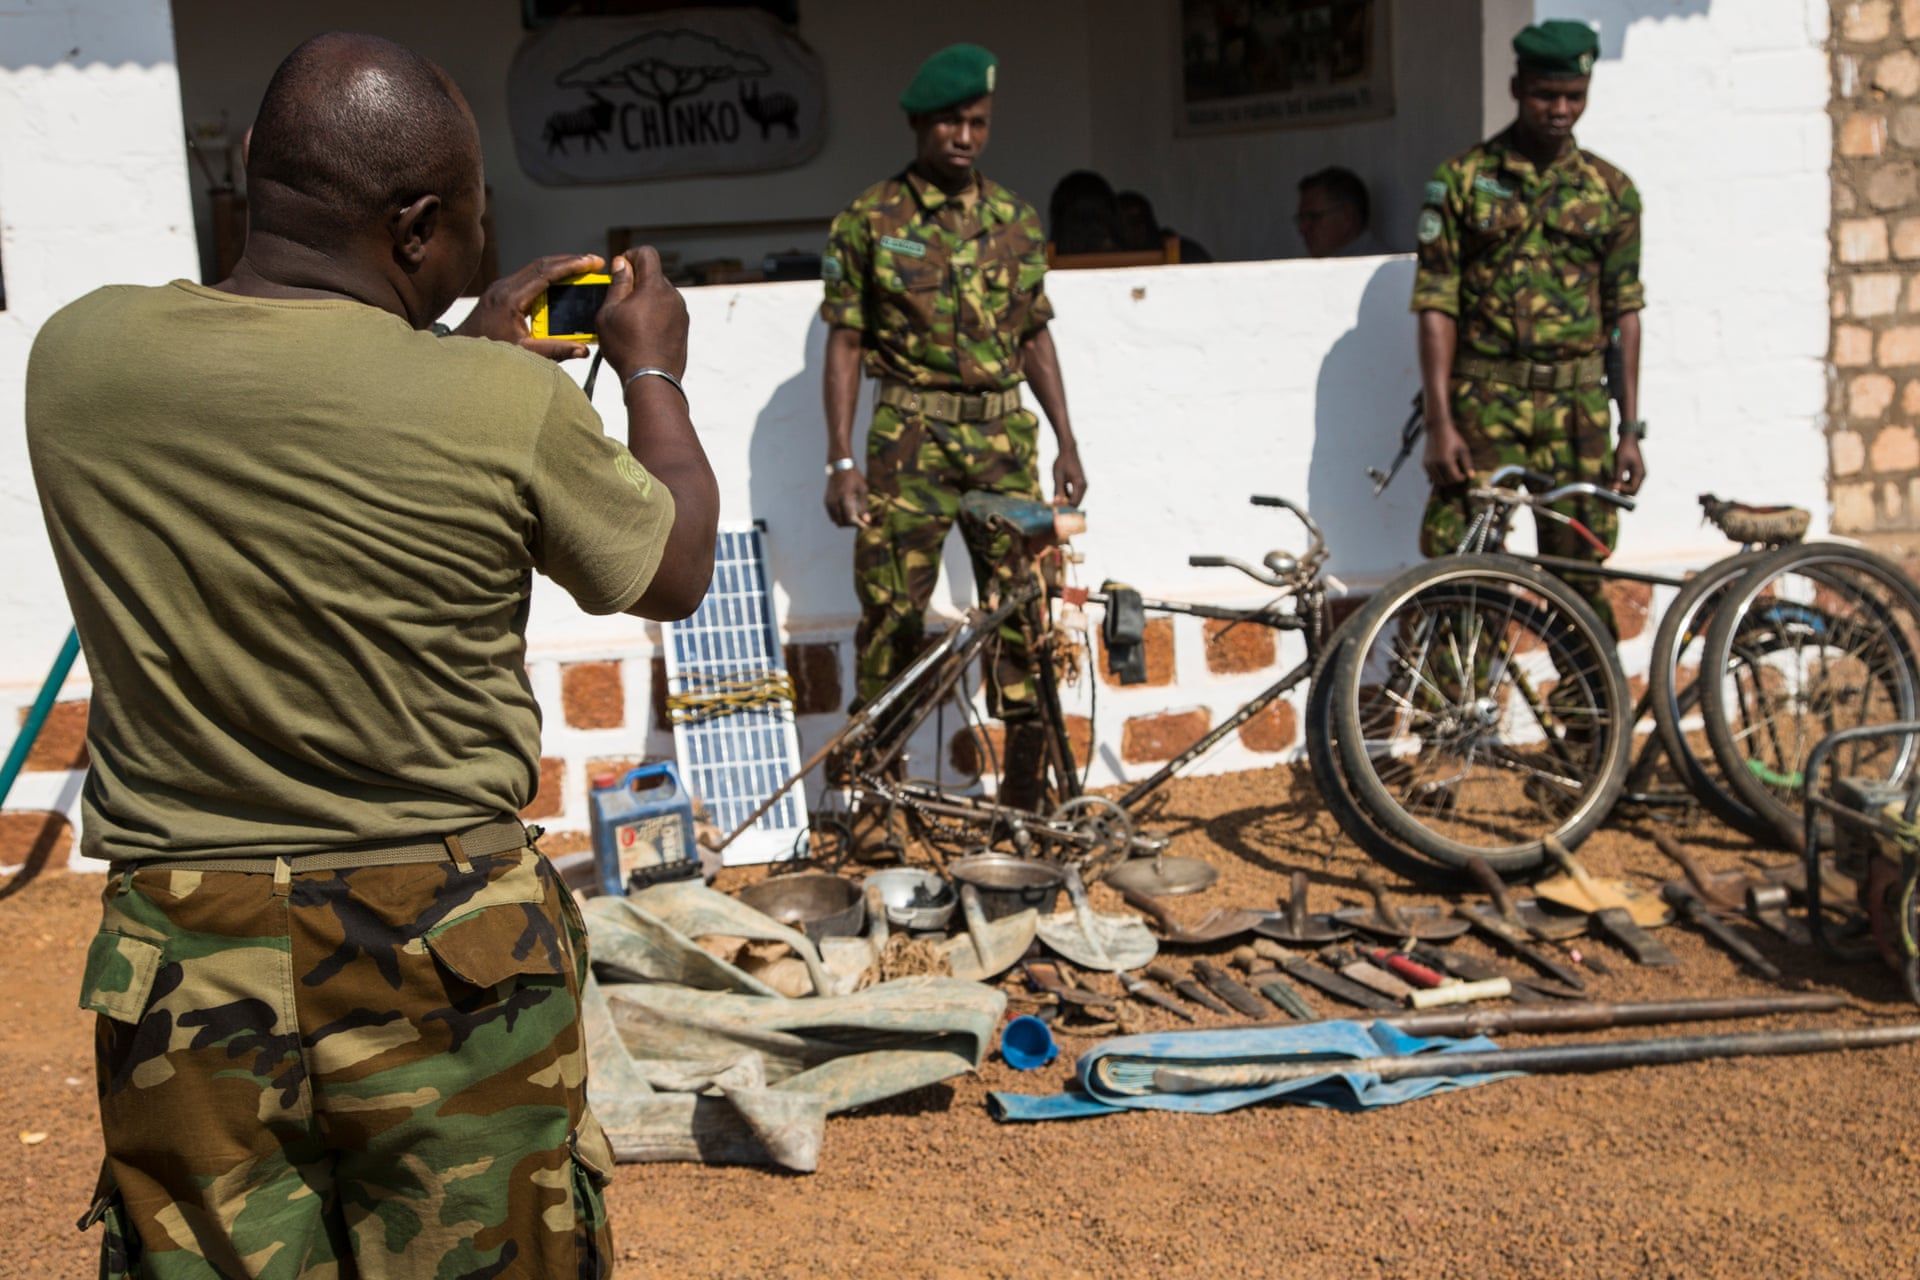 Two rangers pose for a photo next to machetes, knives, spades and other equipment which have been confiscated from poachers and laid out at Chinko’s HQ. Image by Jack Losh. Central African Republic, 2018.